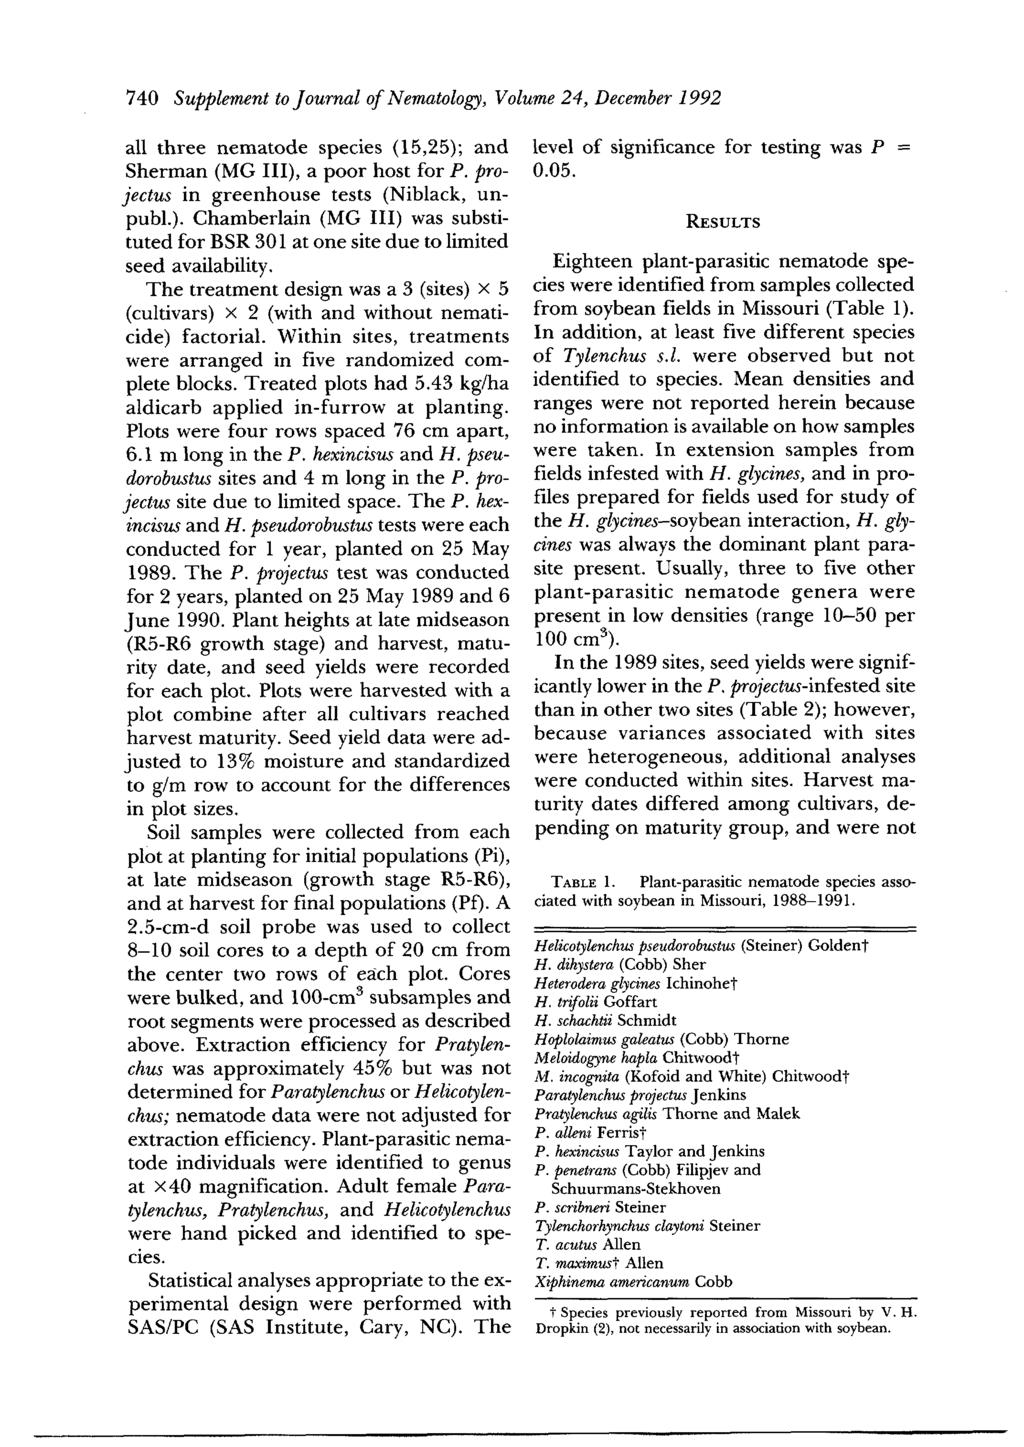 740 Supplement to Journal of Nematology, Volume 24, December 1992 all three nematode species (15,25); and Sherman (MG III), a poor host for P. projectus in greenhouse tests (Niblack, unpubl.). Chamberlain (MG III) was substituted for BSR 301 at one site due to limited seed availability.